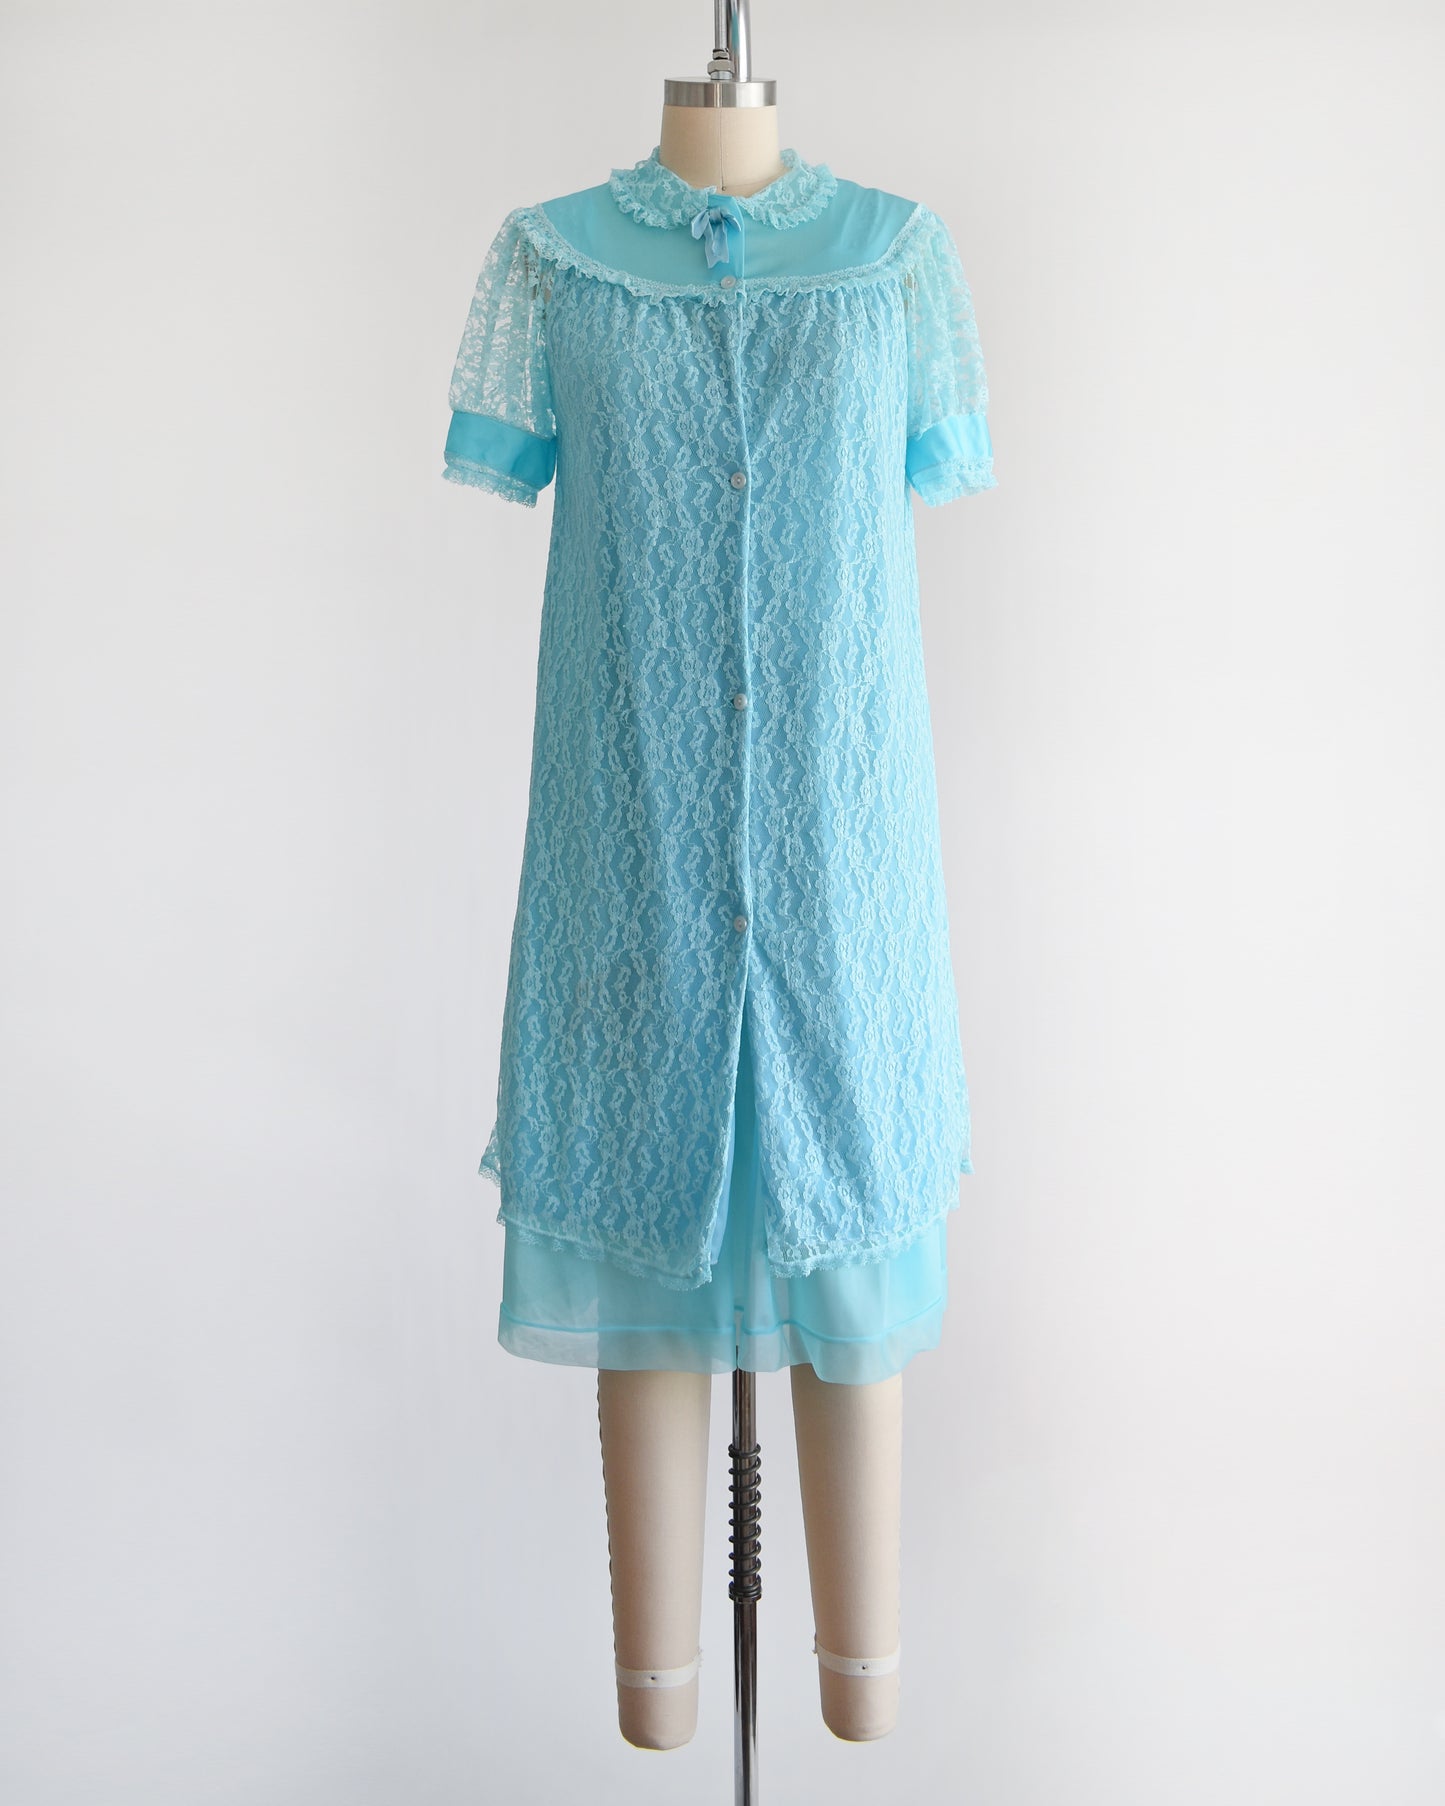 A vintage 1960s aqua blue peignoir set that comes with a lace robe and matching nightgown. The robe is buttoned in this photo.